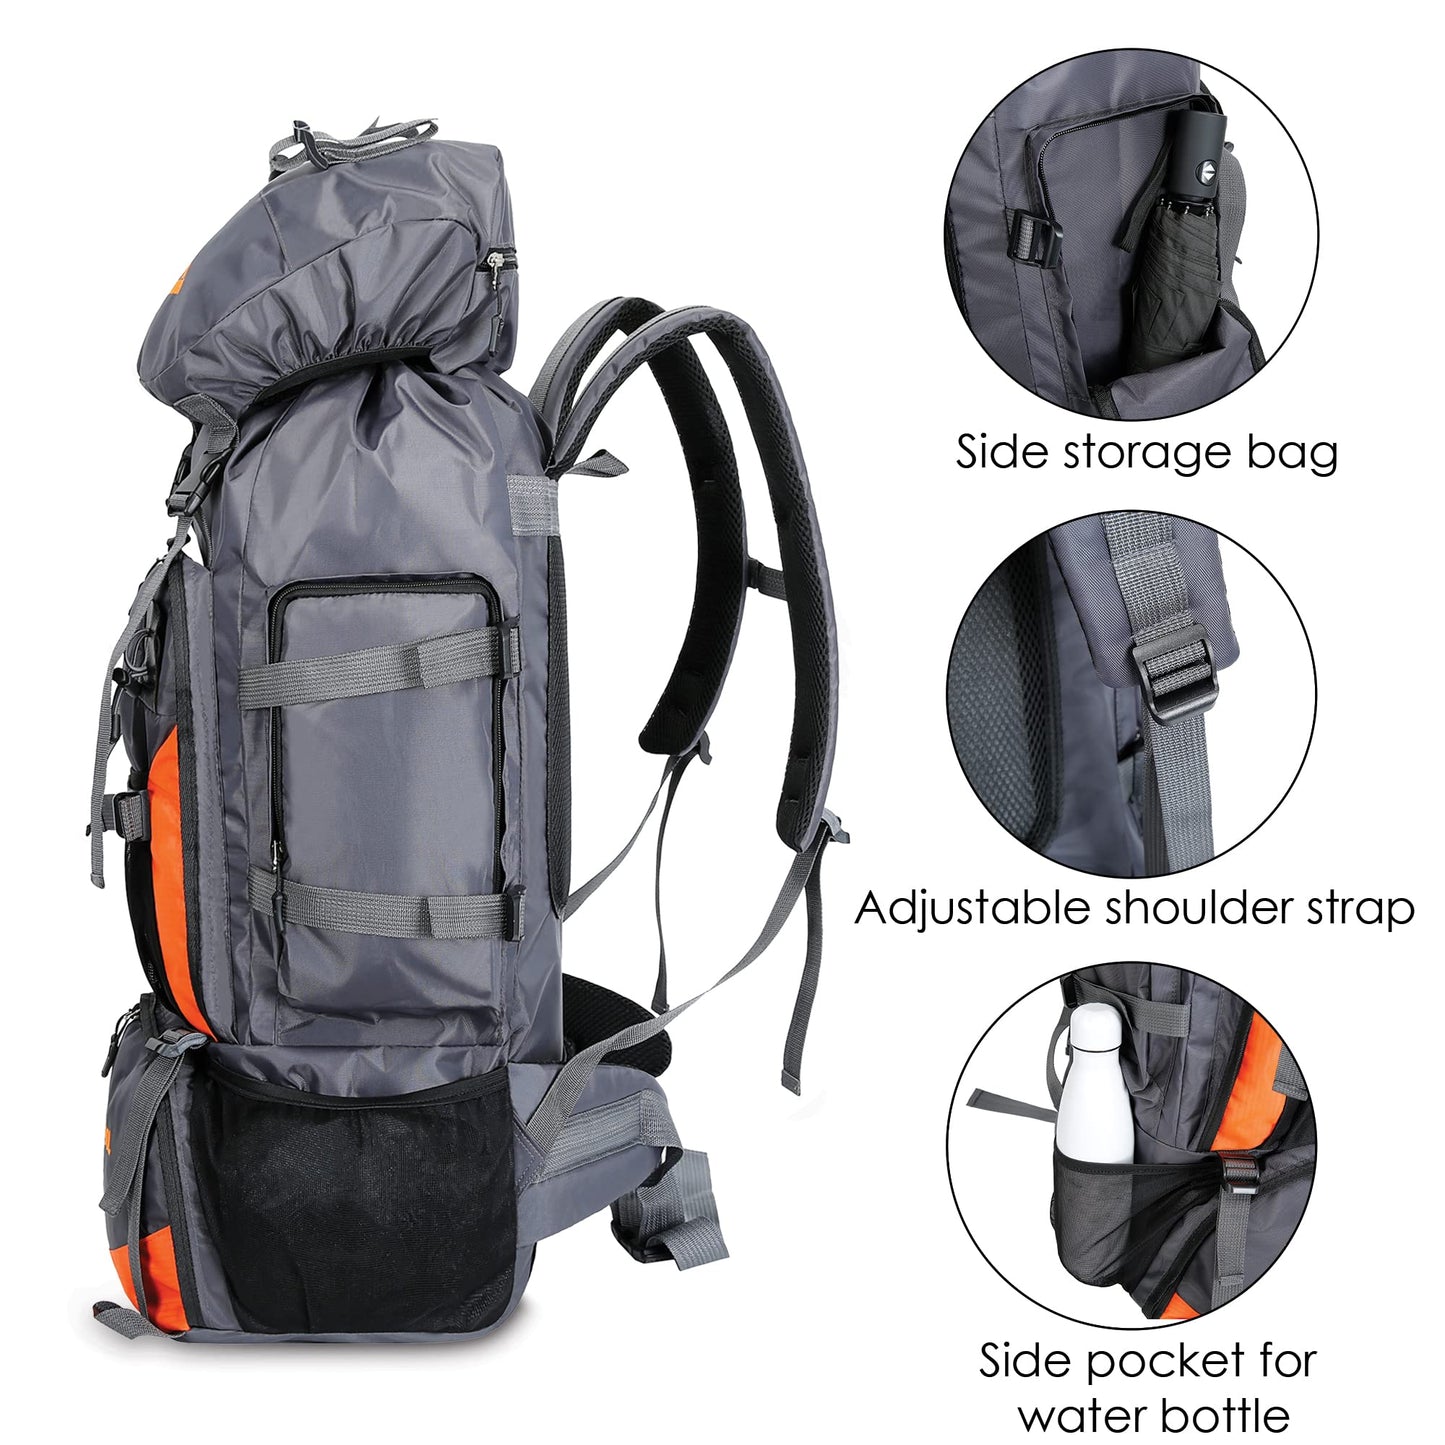 THE CLOWNFISH Summit Seeker 90 Litres Polyester Travel Backpack for Mountaineering Outdoor Sport Camp Hiking Trekking Bag Camping Rucksack Bagpack Bags (Light Grey)